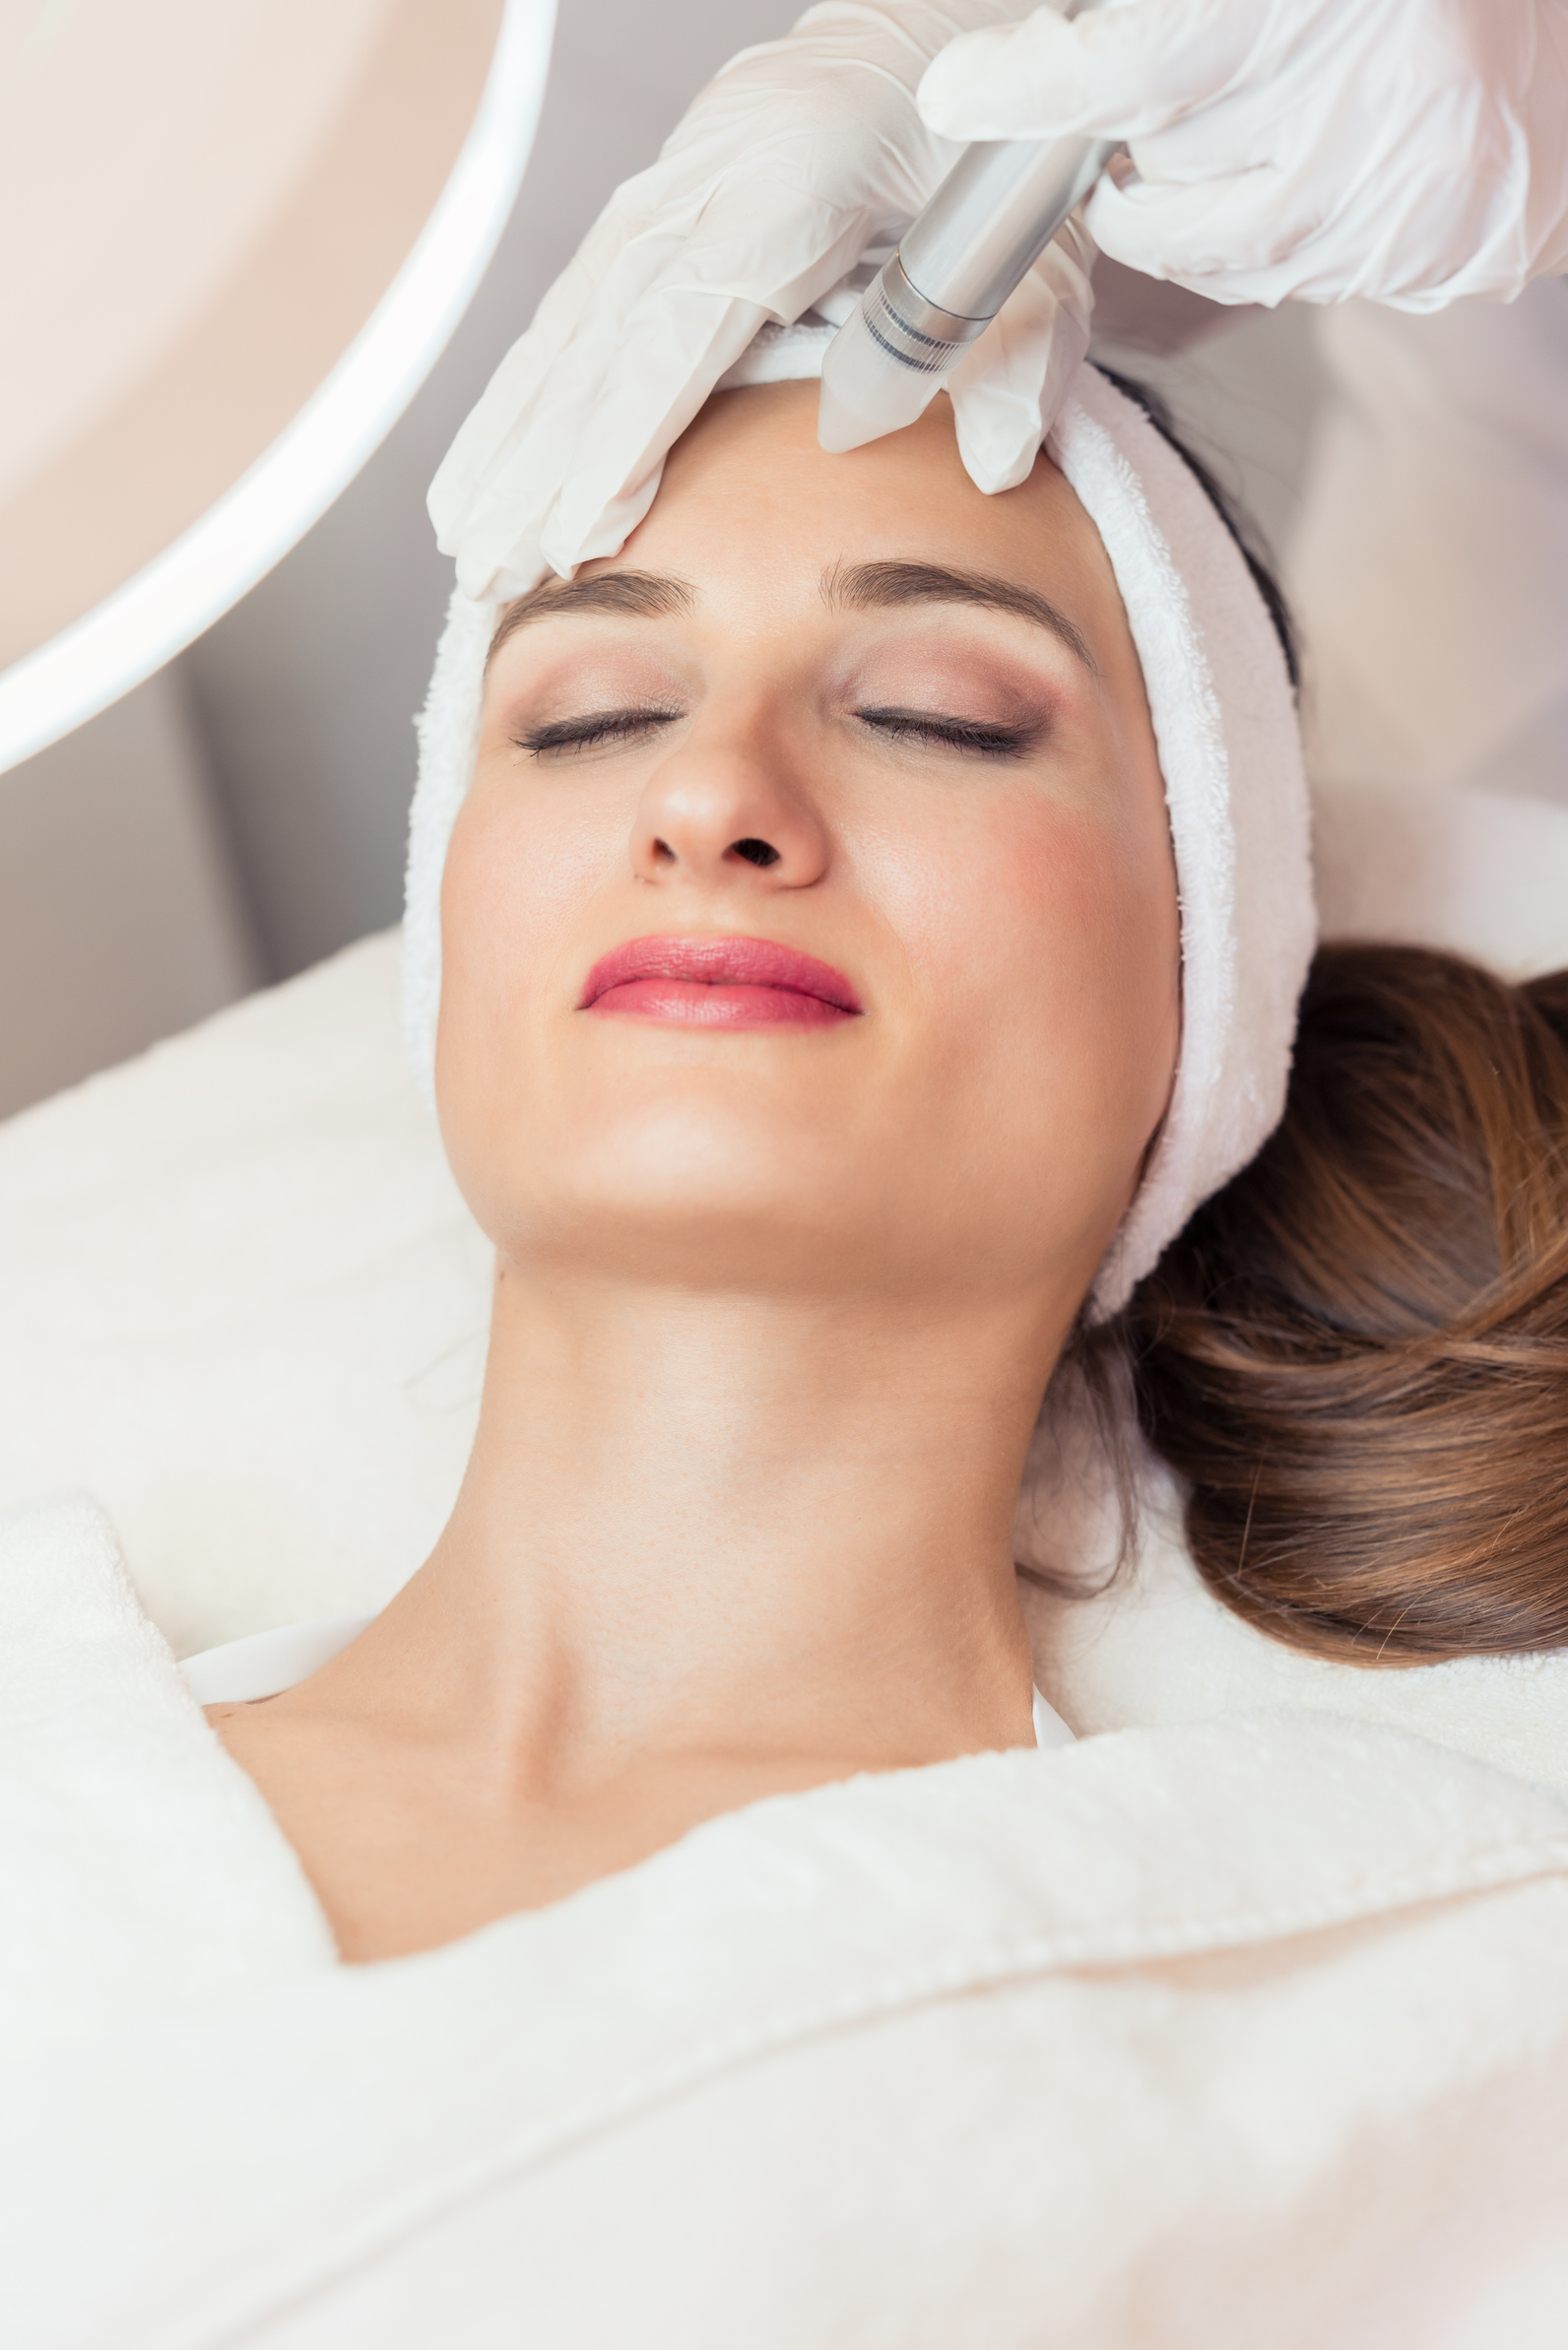 Face of a Beautiful Woman During Facial Treatment